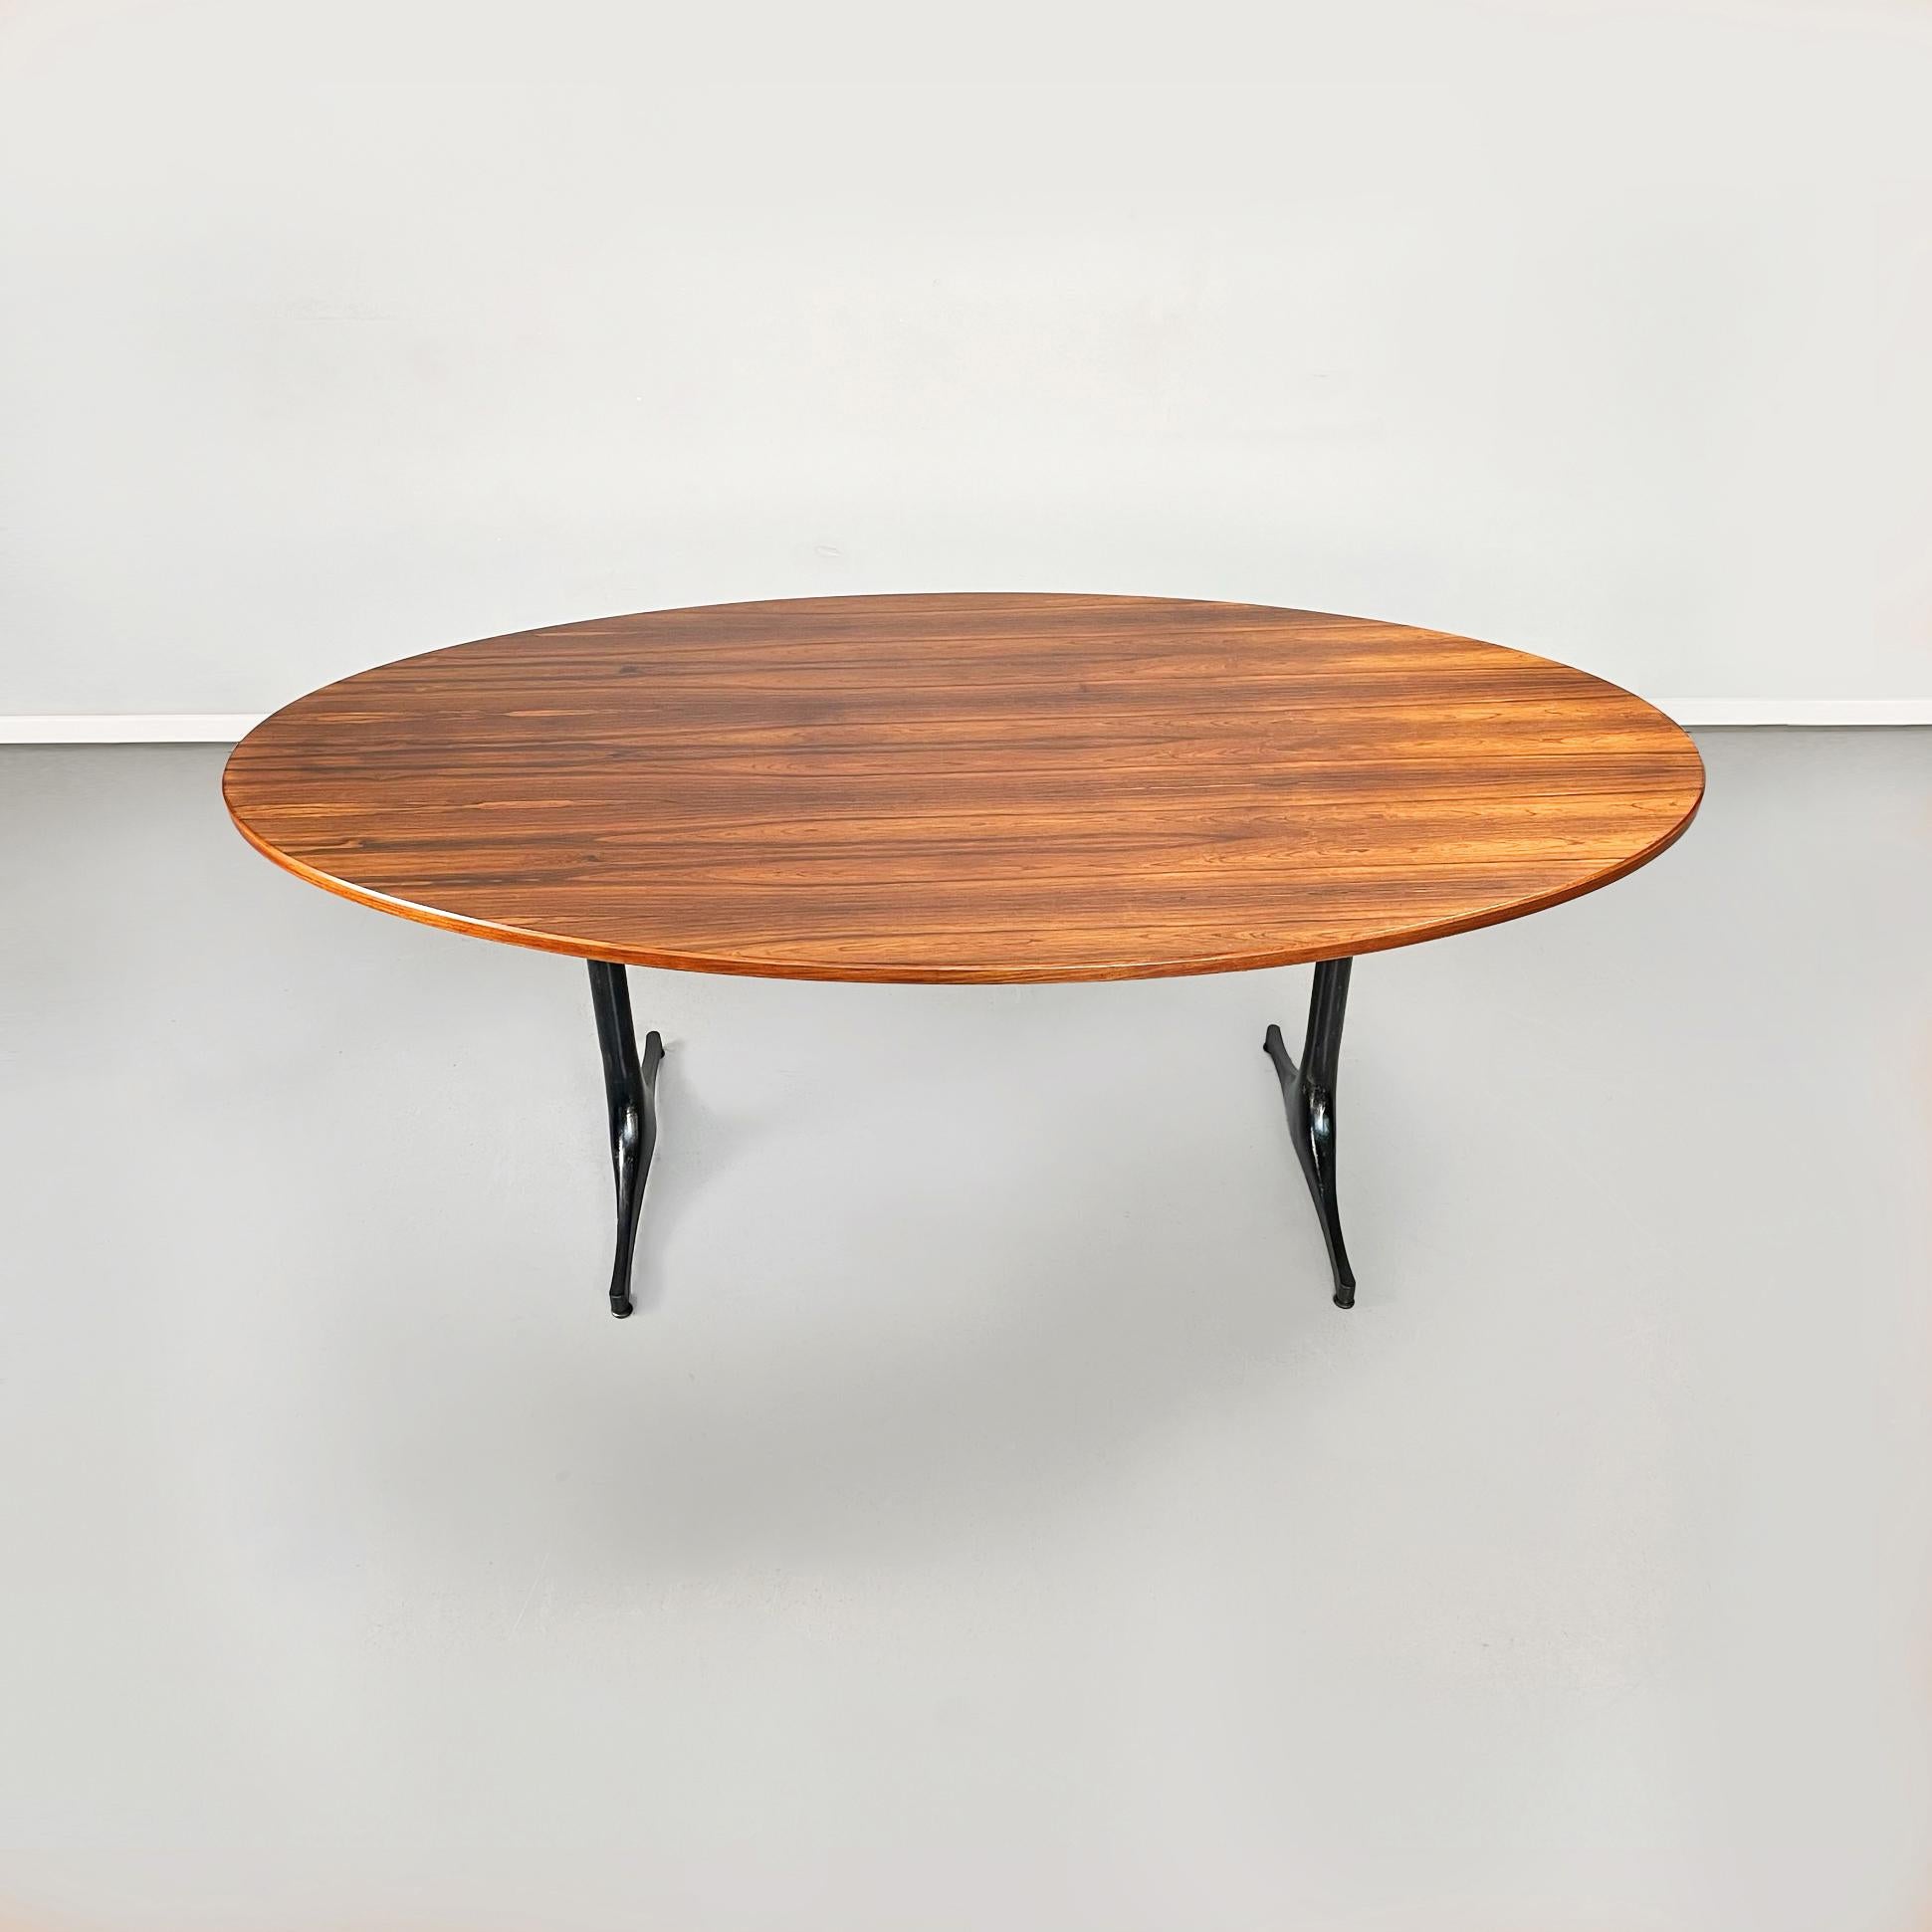 Mid-20th Century American Modern Wood Metal Dining Table by George Nelson Herman Miller, 1960s